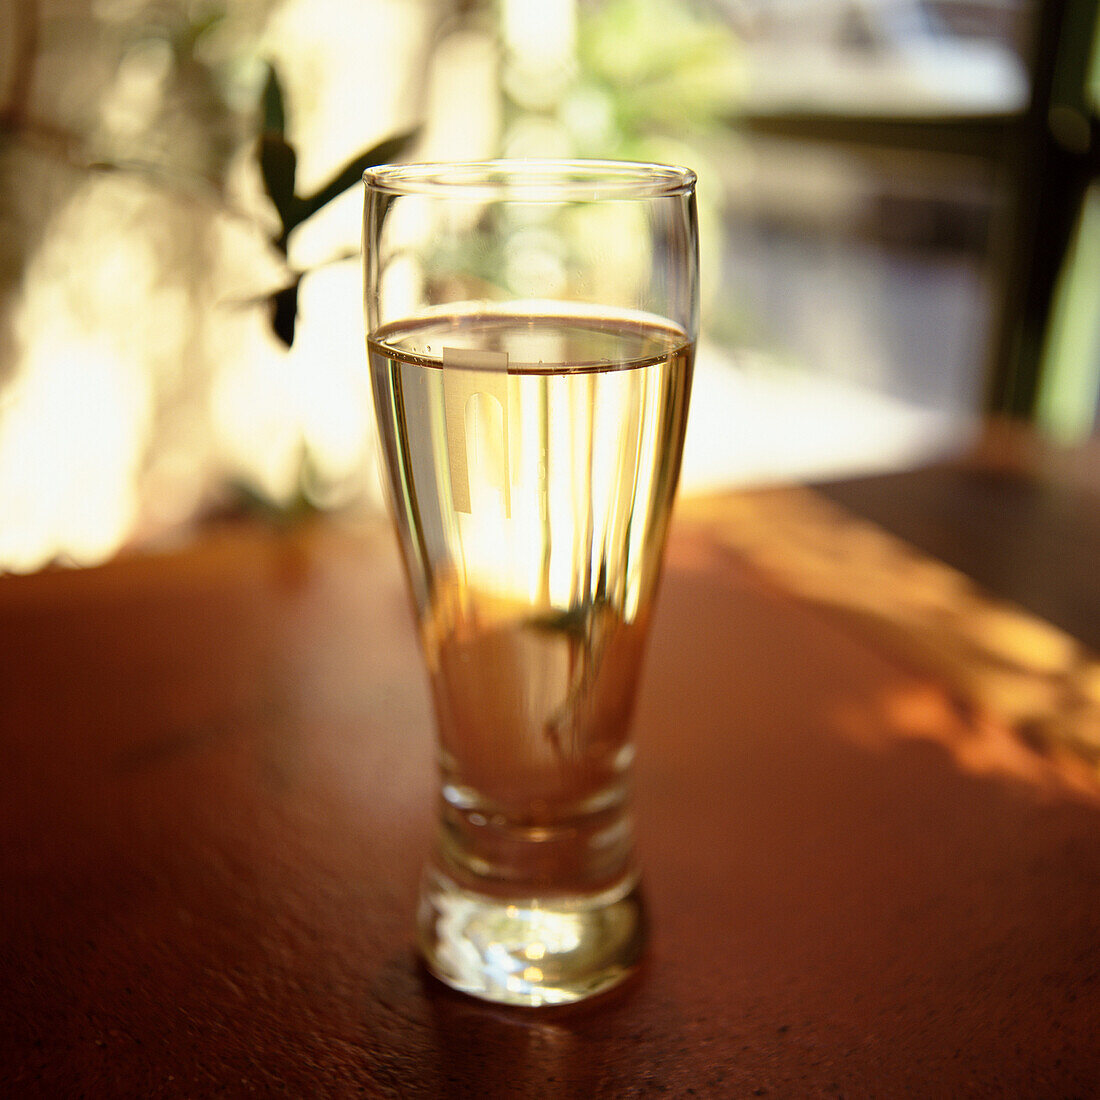 Glass of water, close-up